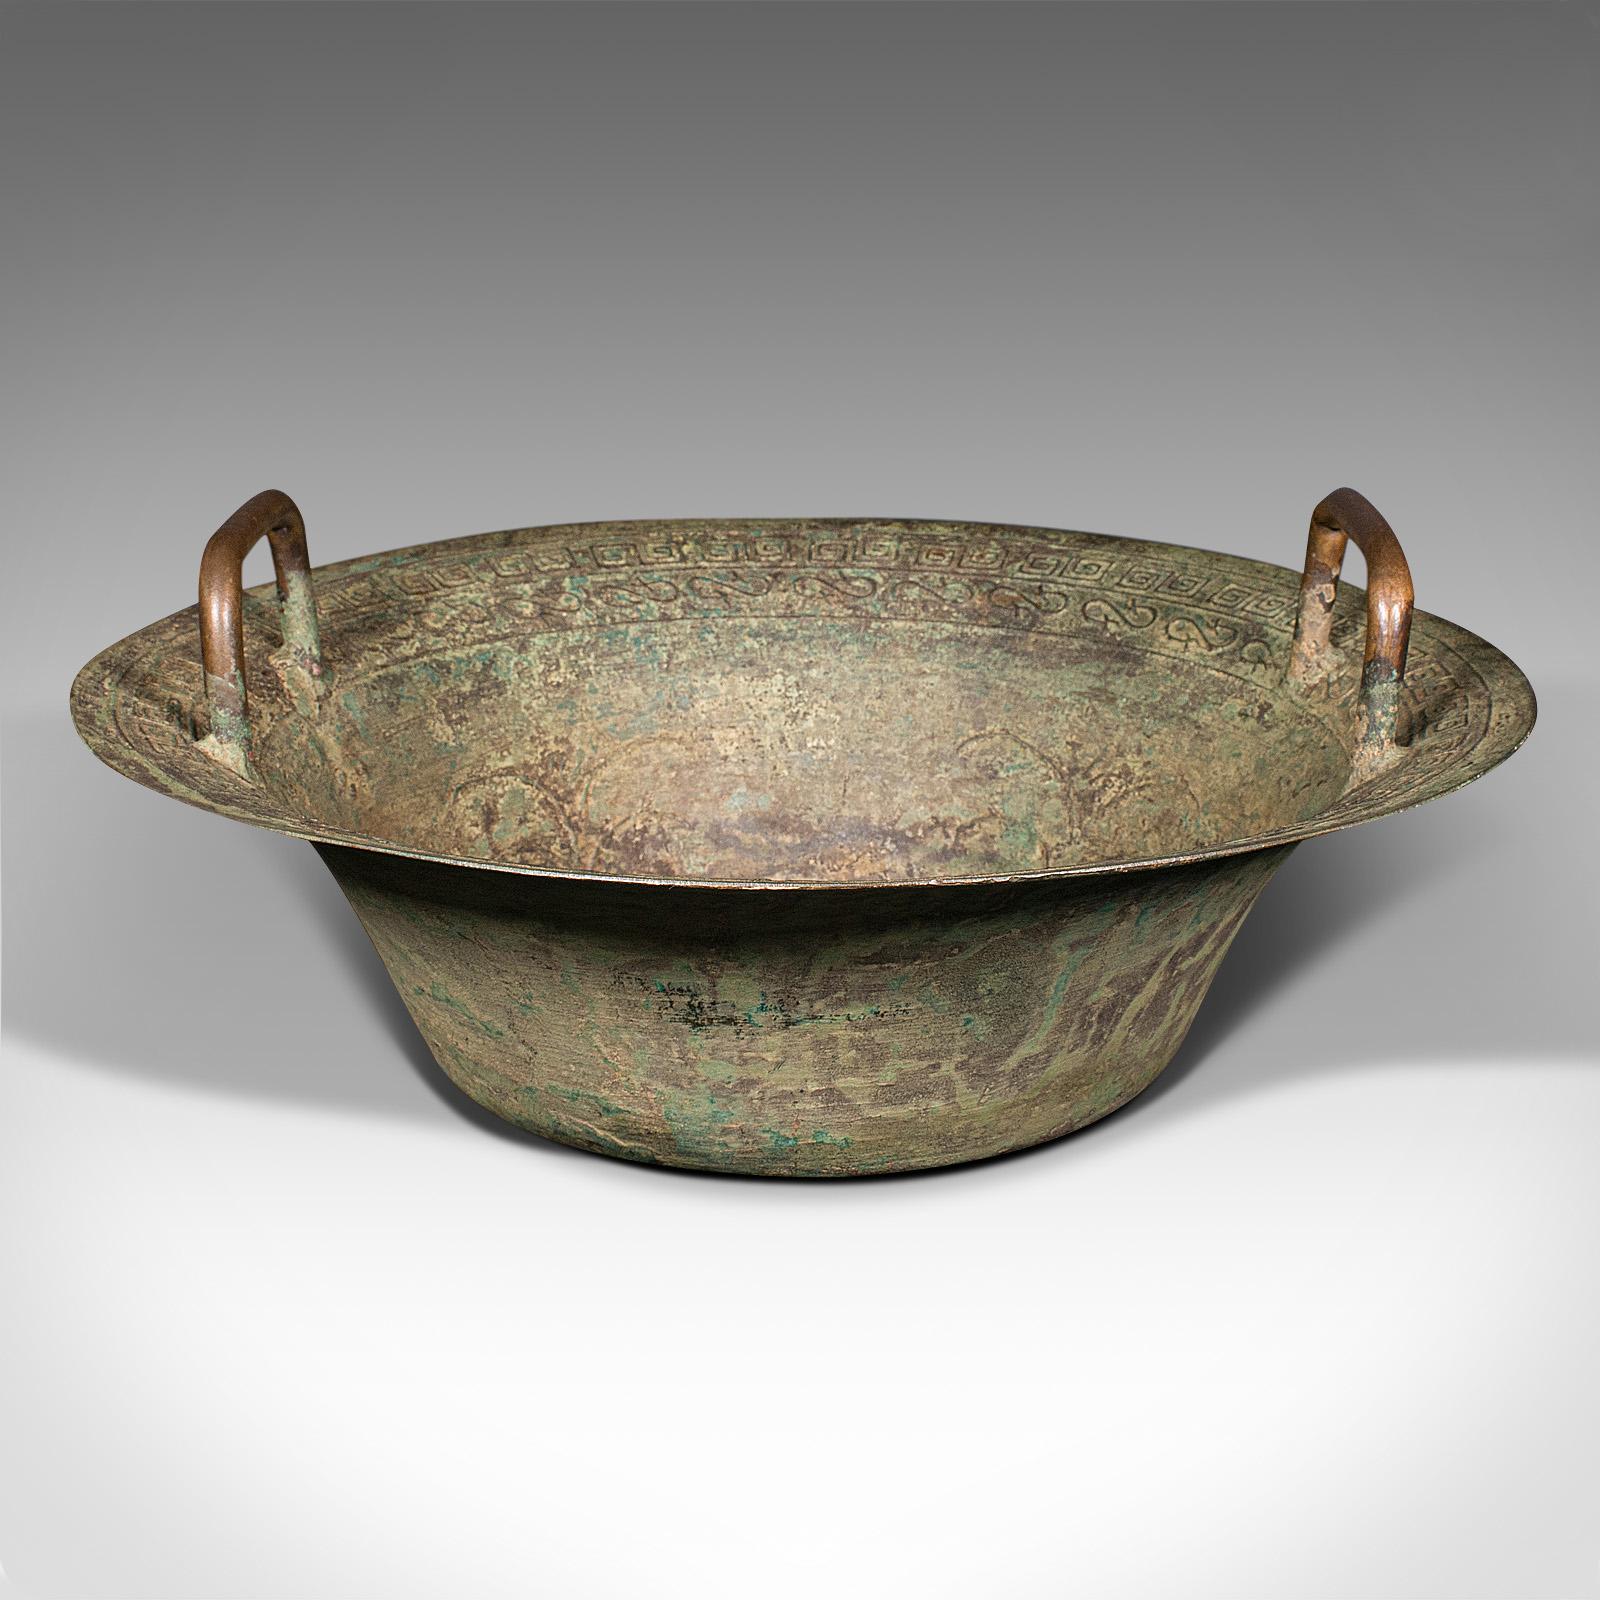 This is an antique ceremonial bowl. A Chinese, patinated brass twin handled dish, dating to the late Victorian period, circa 1900.

Heavily time-worn to distinction, for great decorative appeal
Displaying a desirable aged patina throughout
Weathered